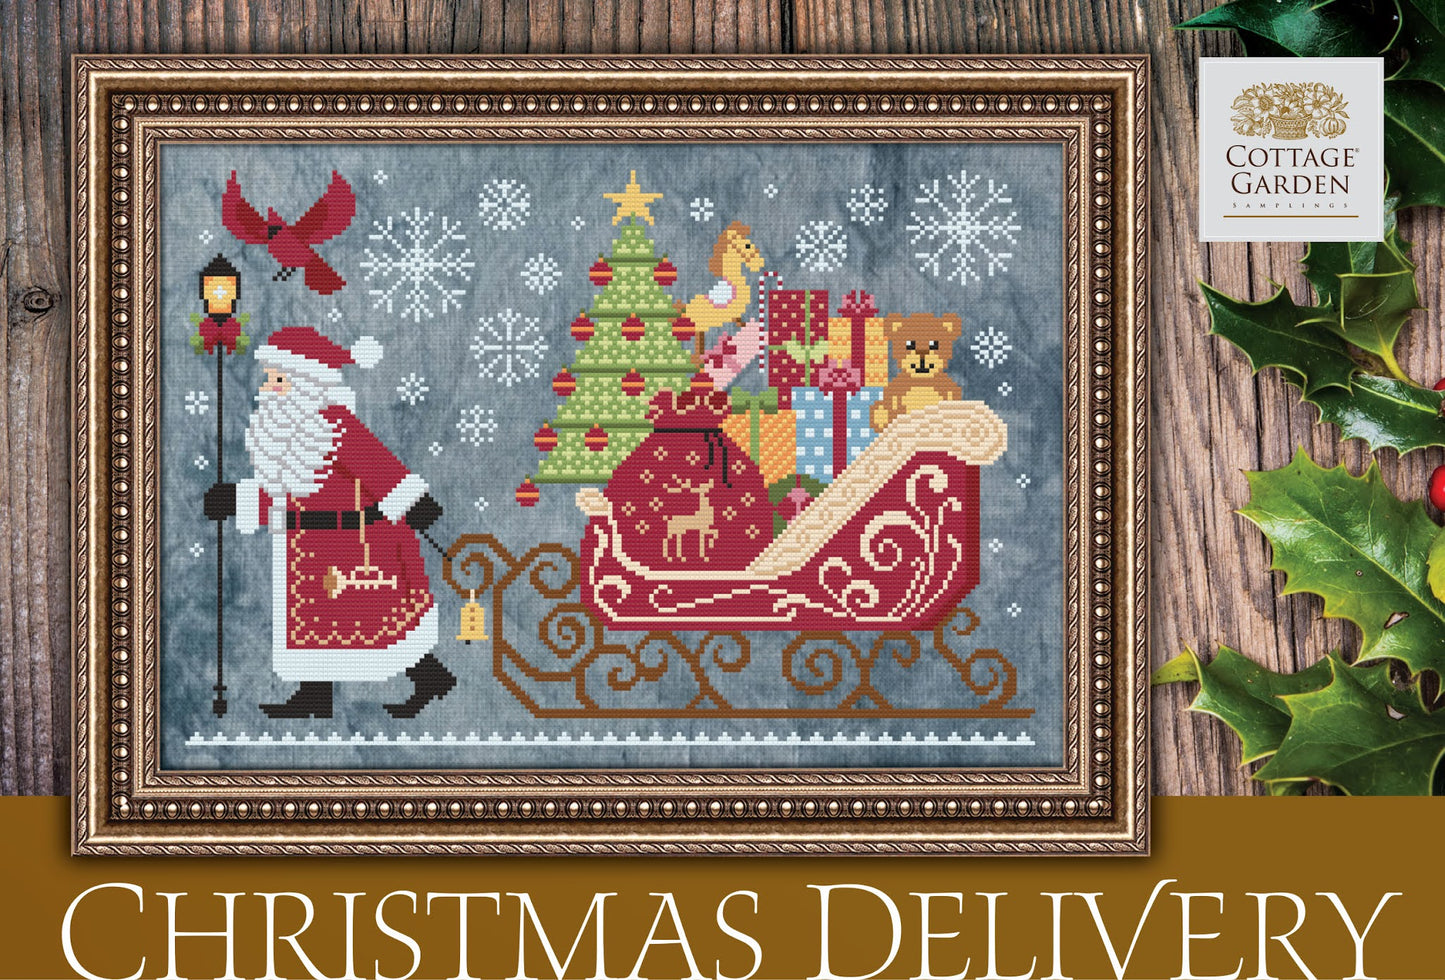 Christmas Delivery - Cross Stitch Chart by Cottage Garden Samplings